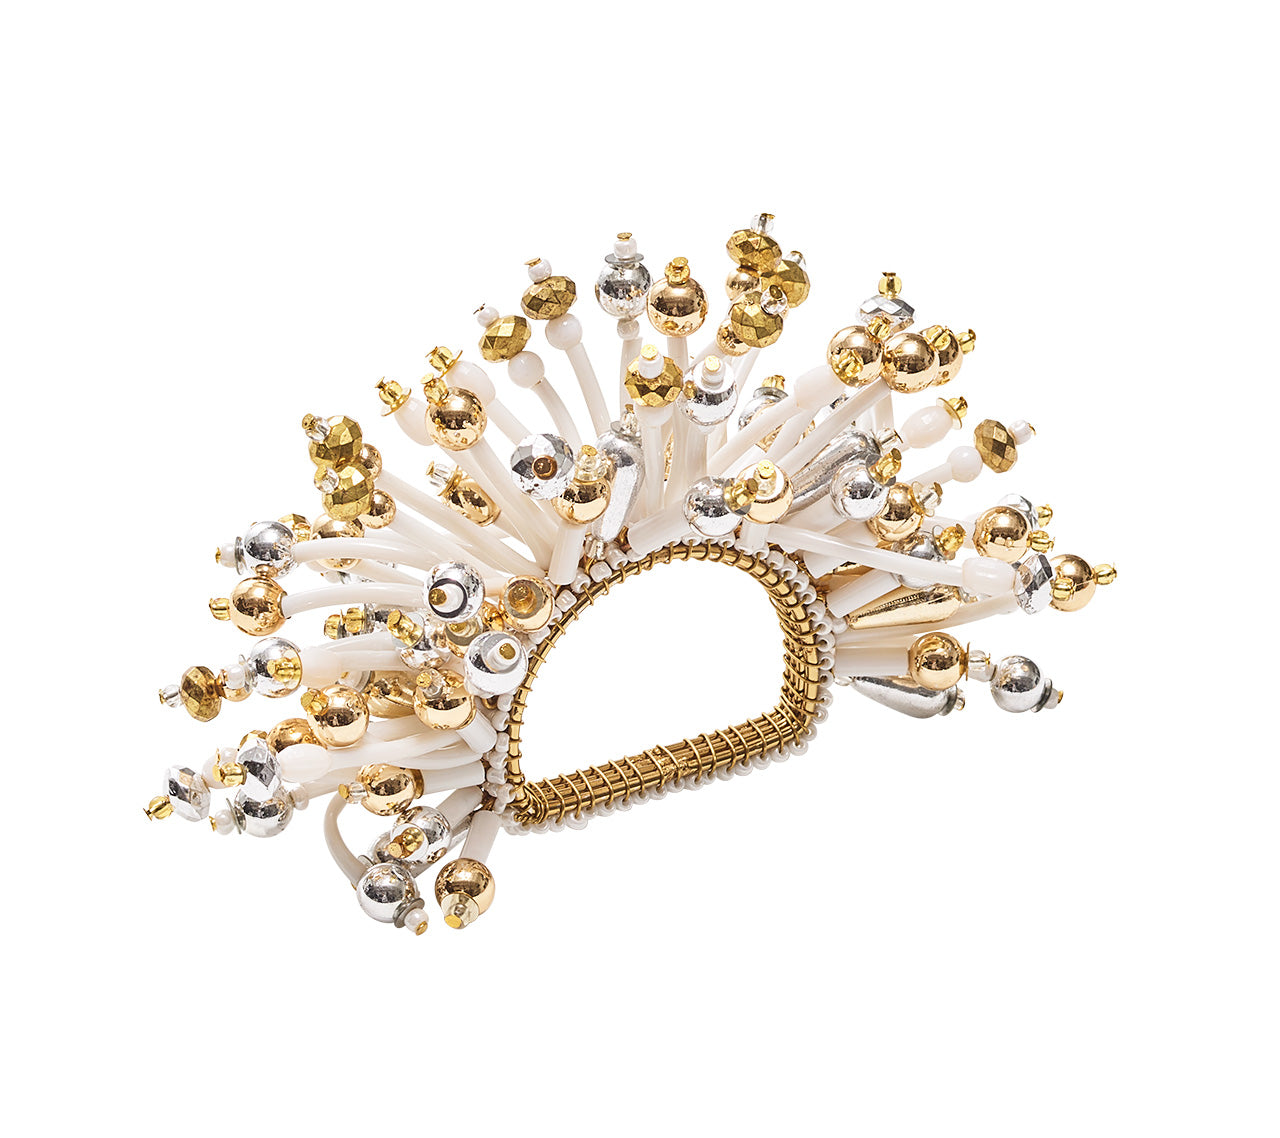 Fun Burst Napkin Ring with silver and gold beads atop dyed silicone tubes with white, gold and silver beads bursting from the ring's base